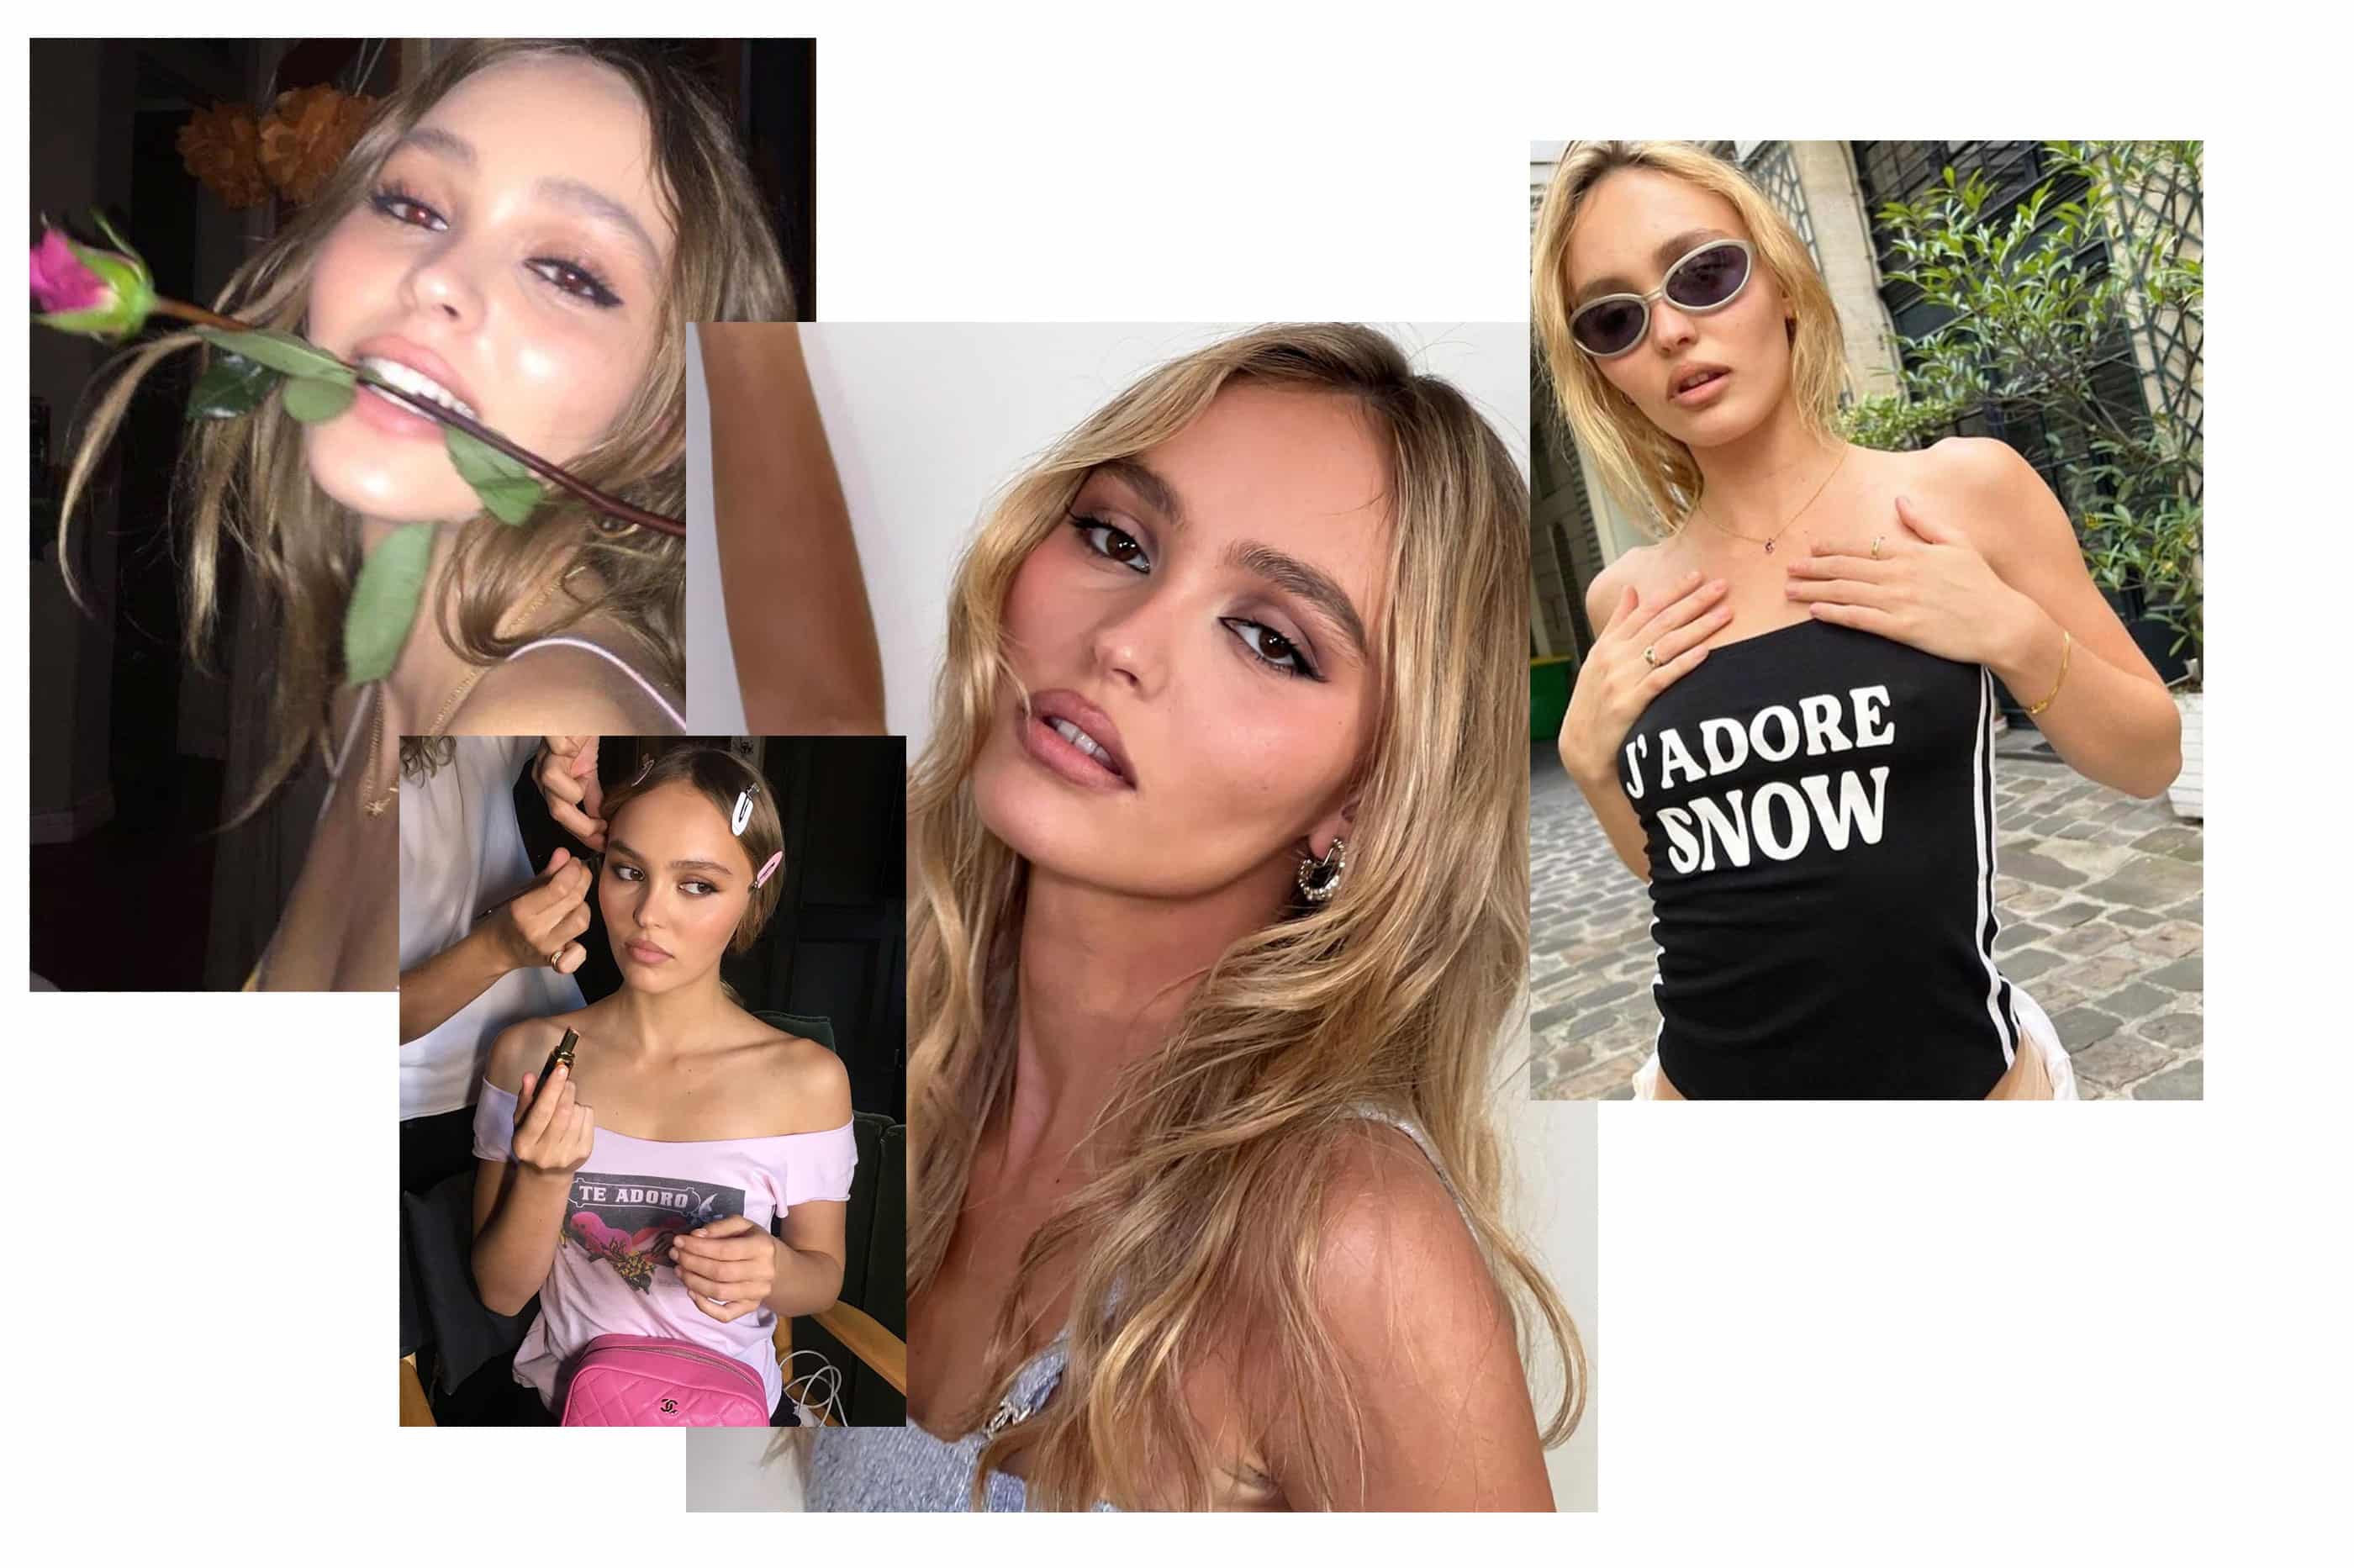 Everything you need to know about 'The Idol' star Lily-Rose Depp